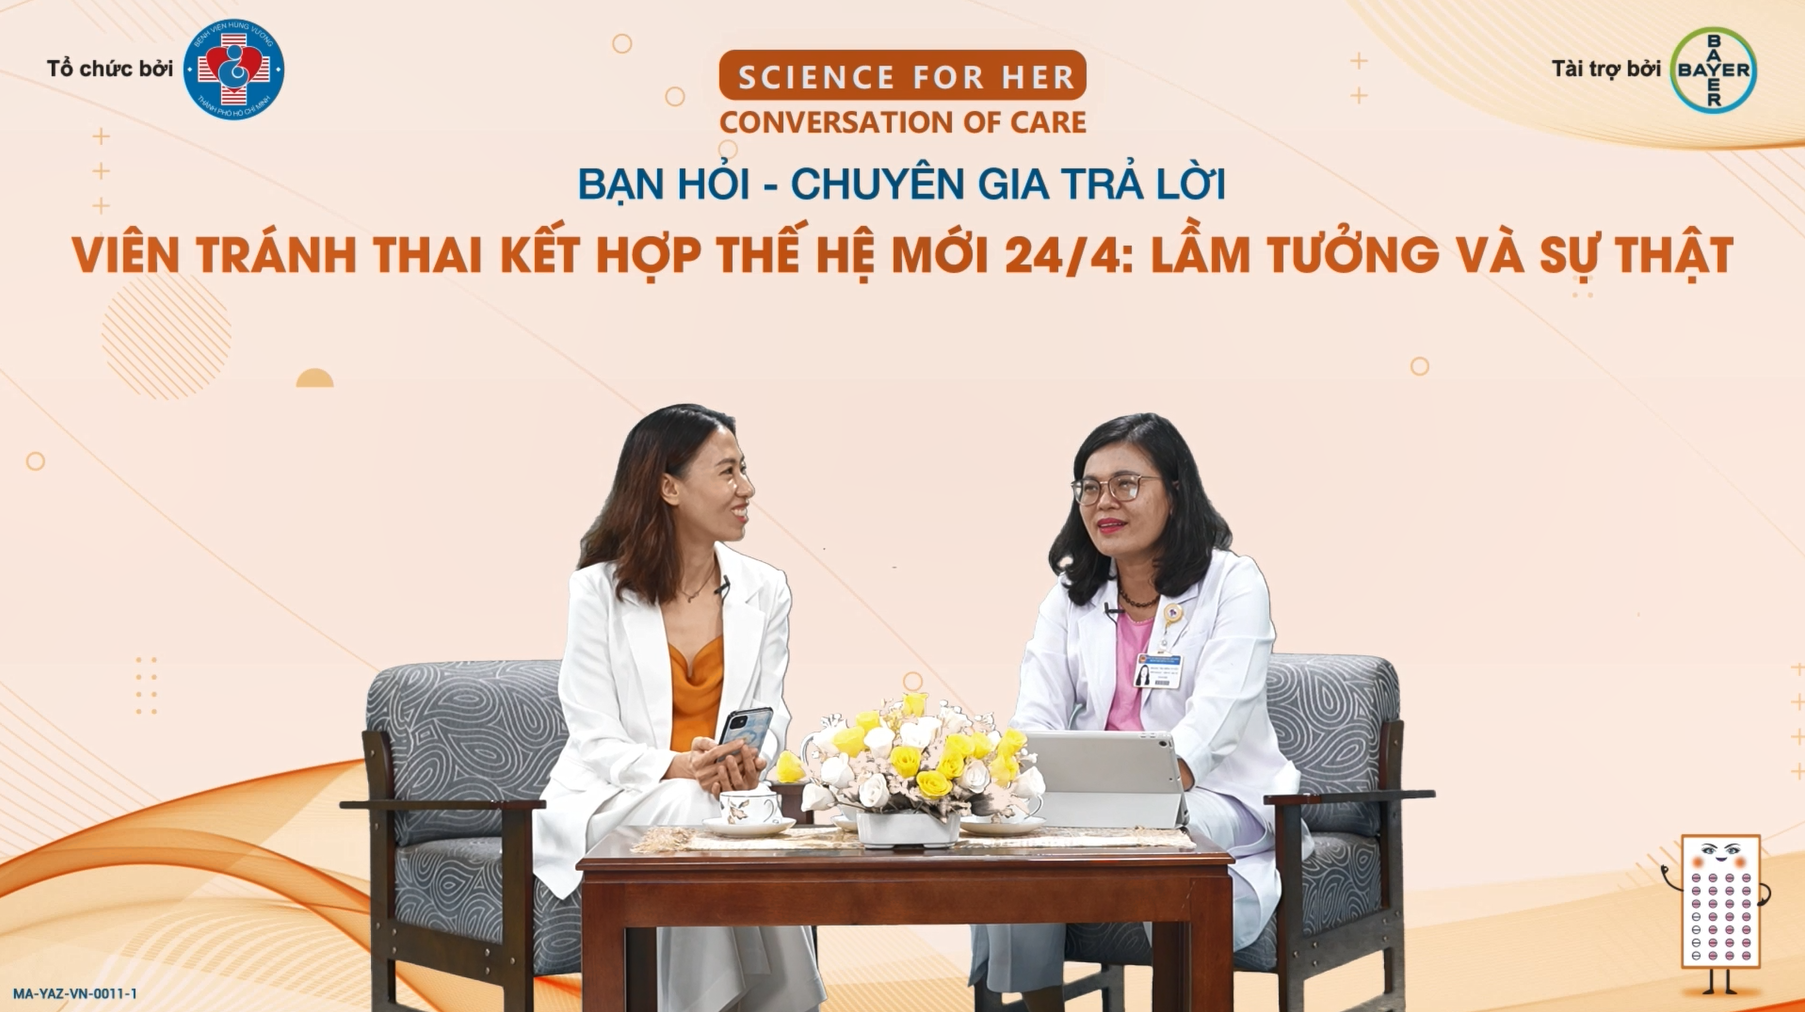 Bayer launches Science for Her campaign to raise awareness of women's healthcare